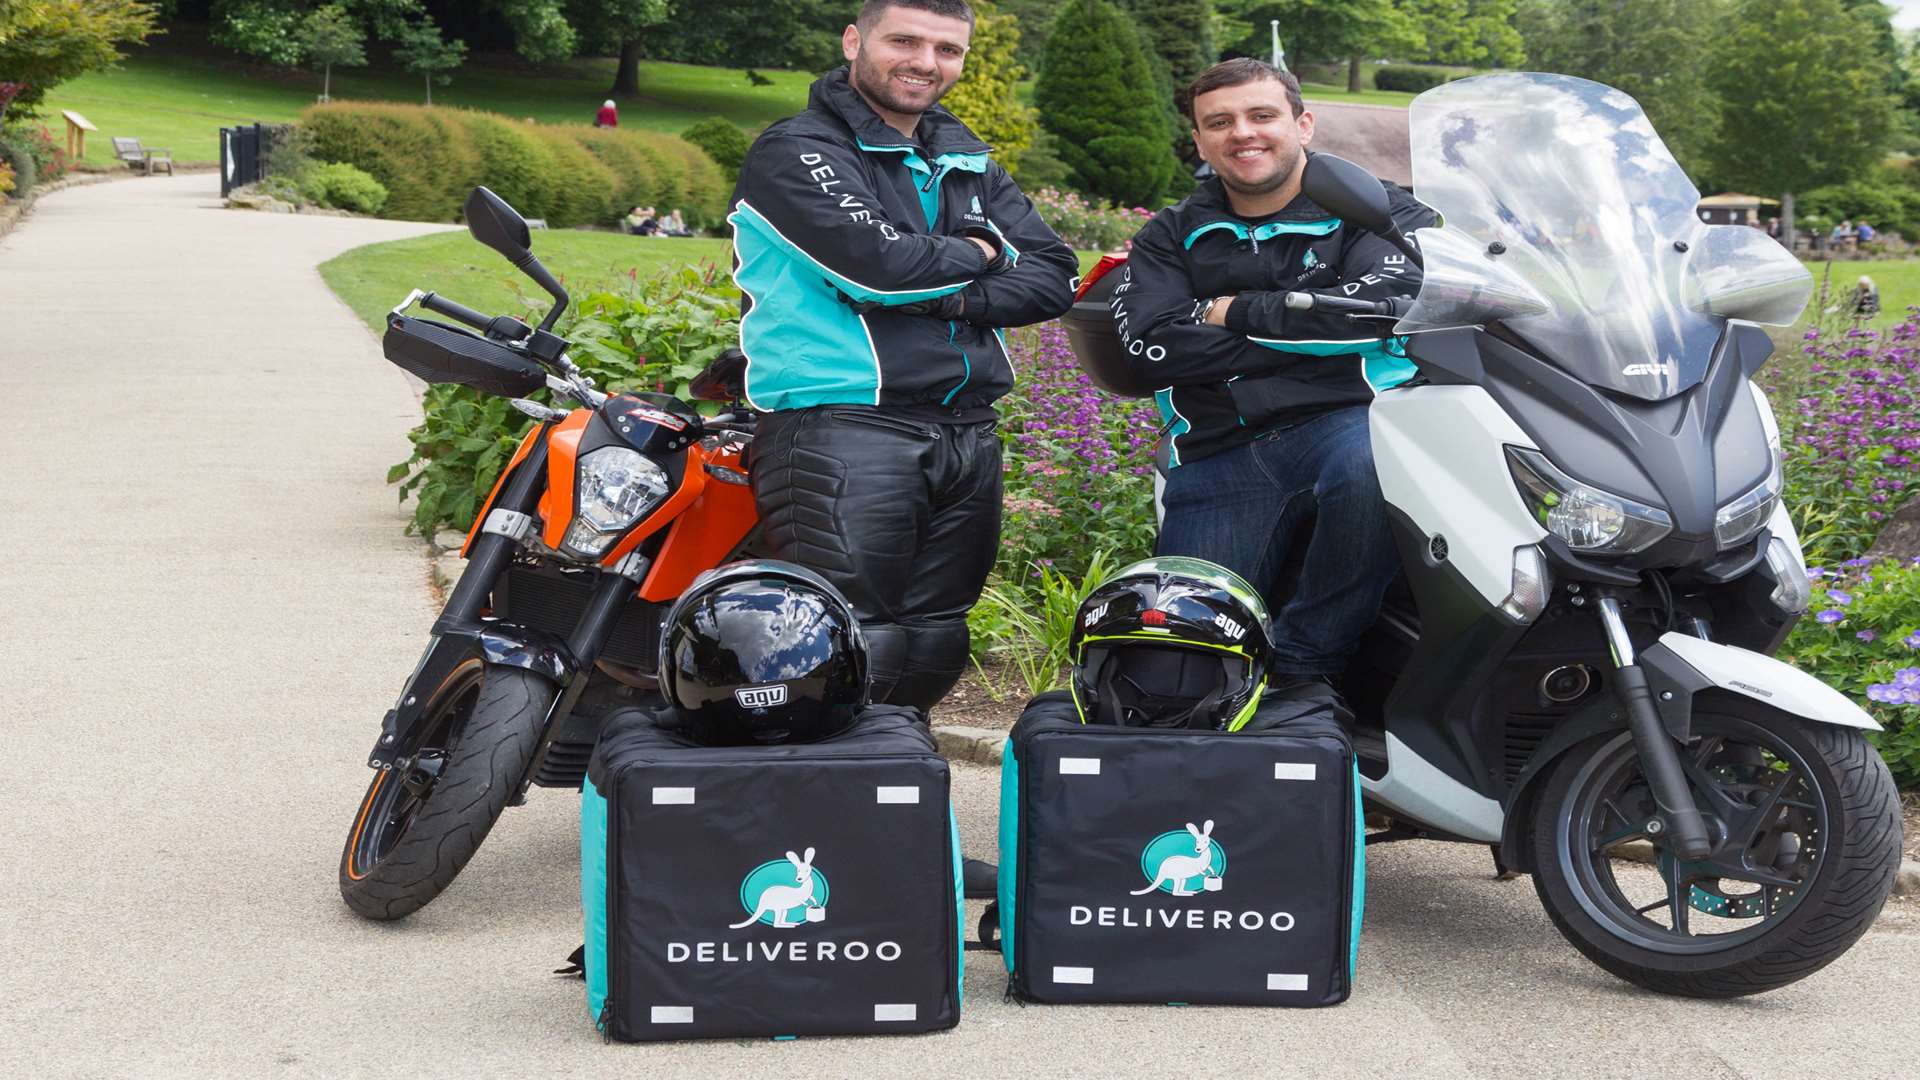 Deliveroo expect to hire 50 staff in the next year - mostly delivery riders